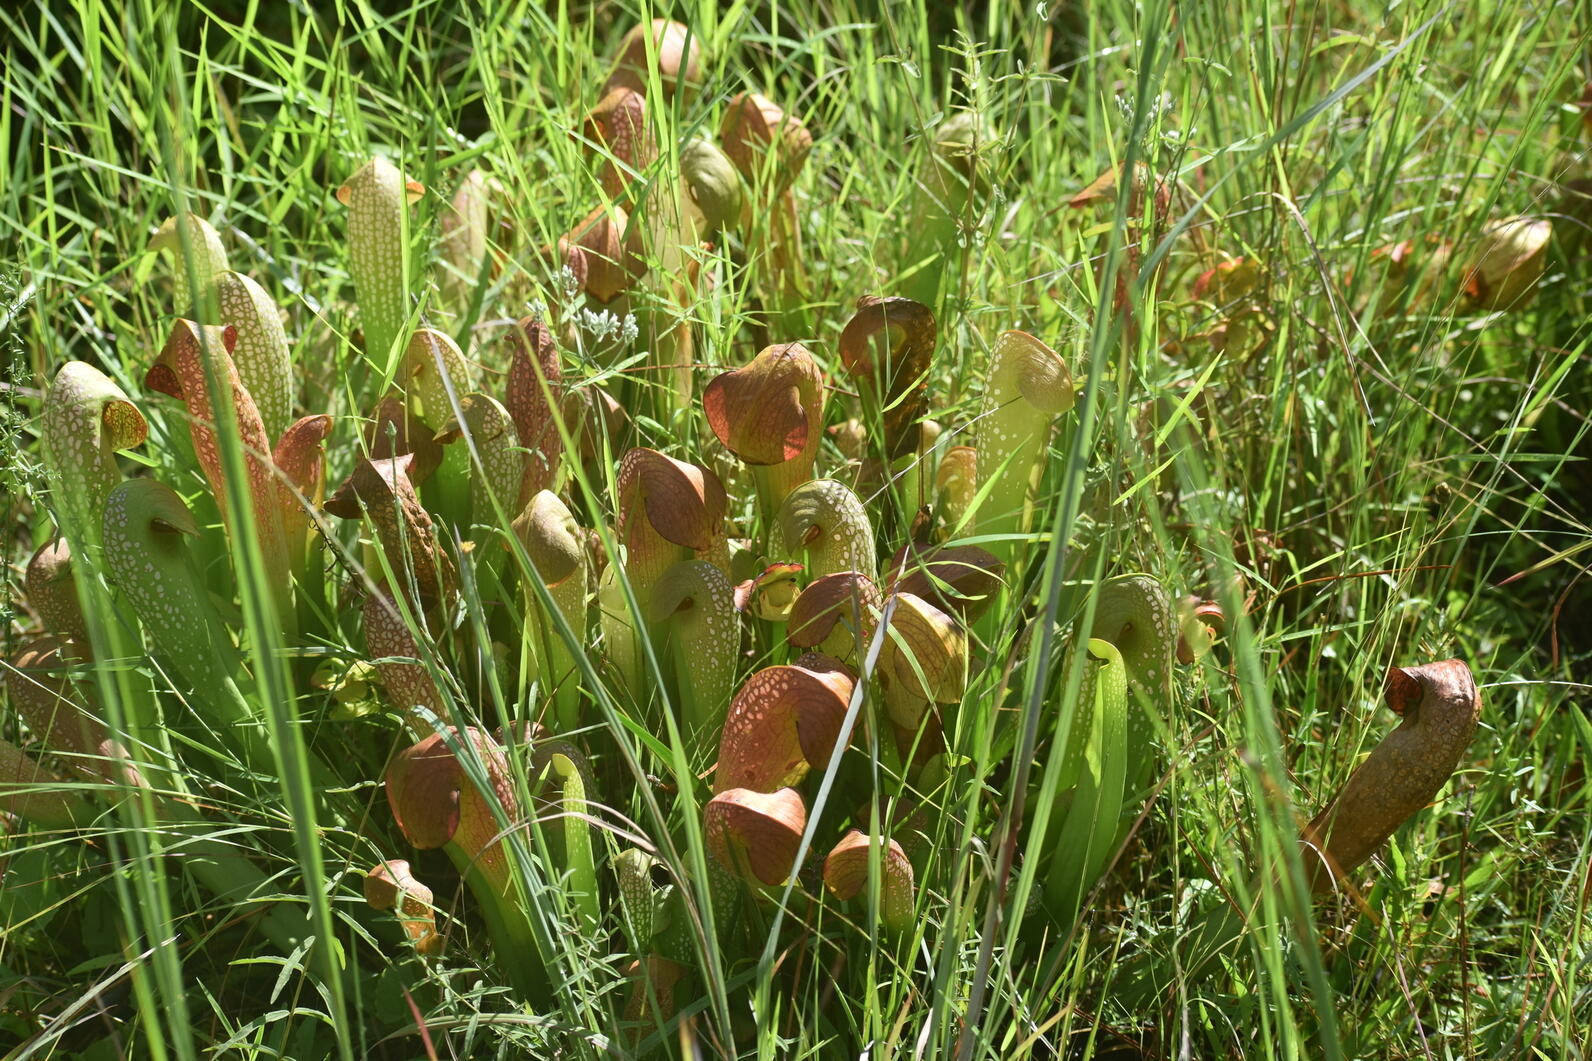 Rising from the grass are pitcher plants, thinner at the base than at the top, the top part of the plant curling over to create a roof that insects cannot escape from.